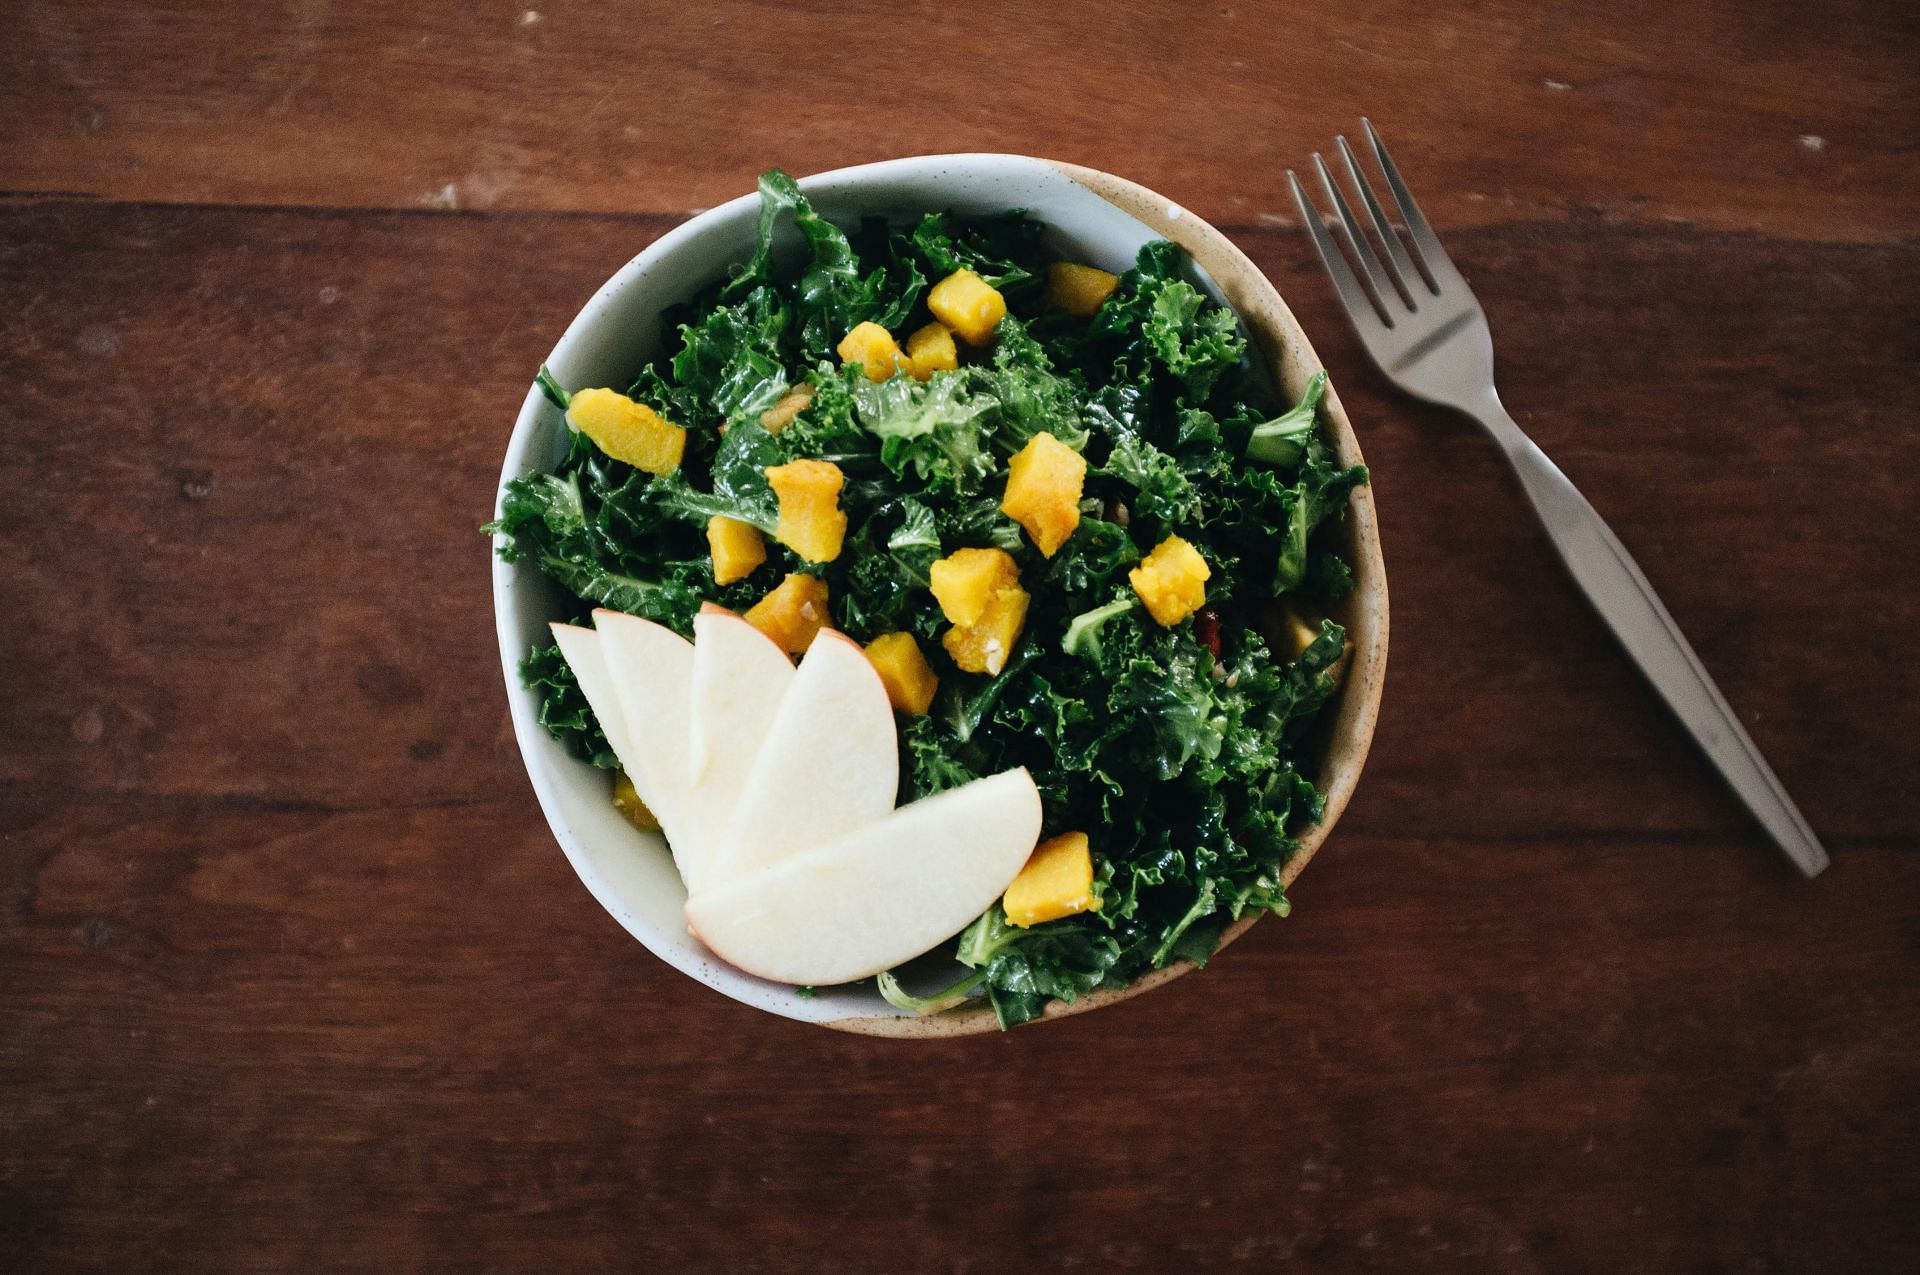 Add leafy greens to your diet to boost collagen production (Image by Cole Patrick/Unsplash)